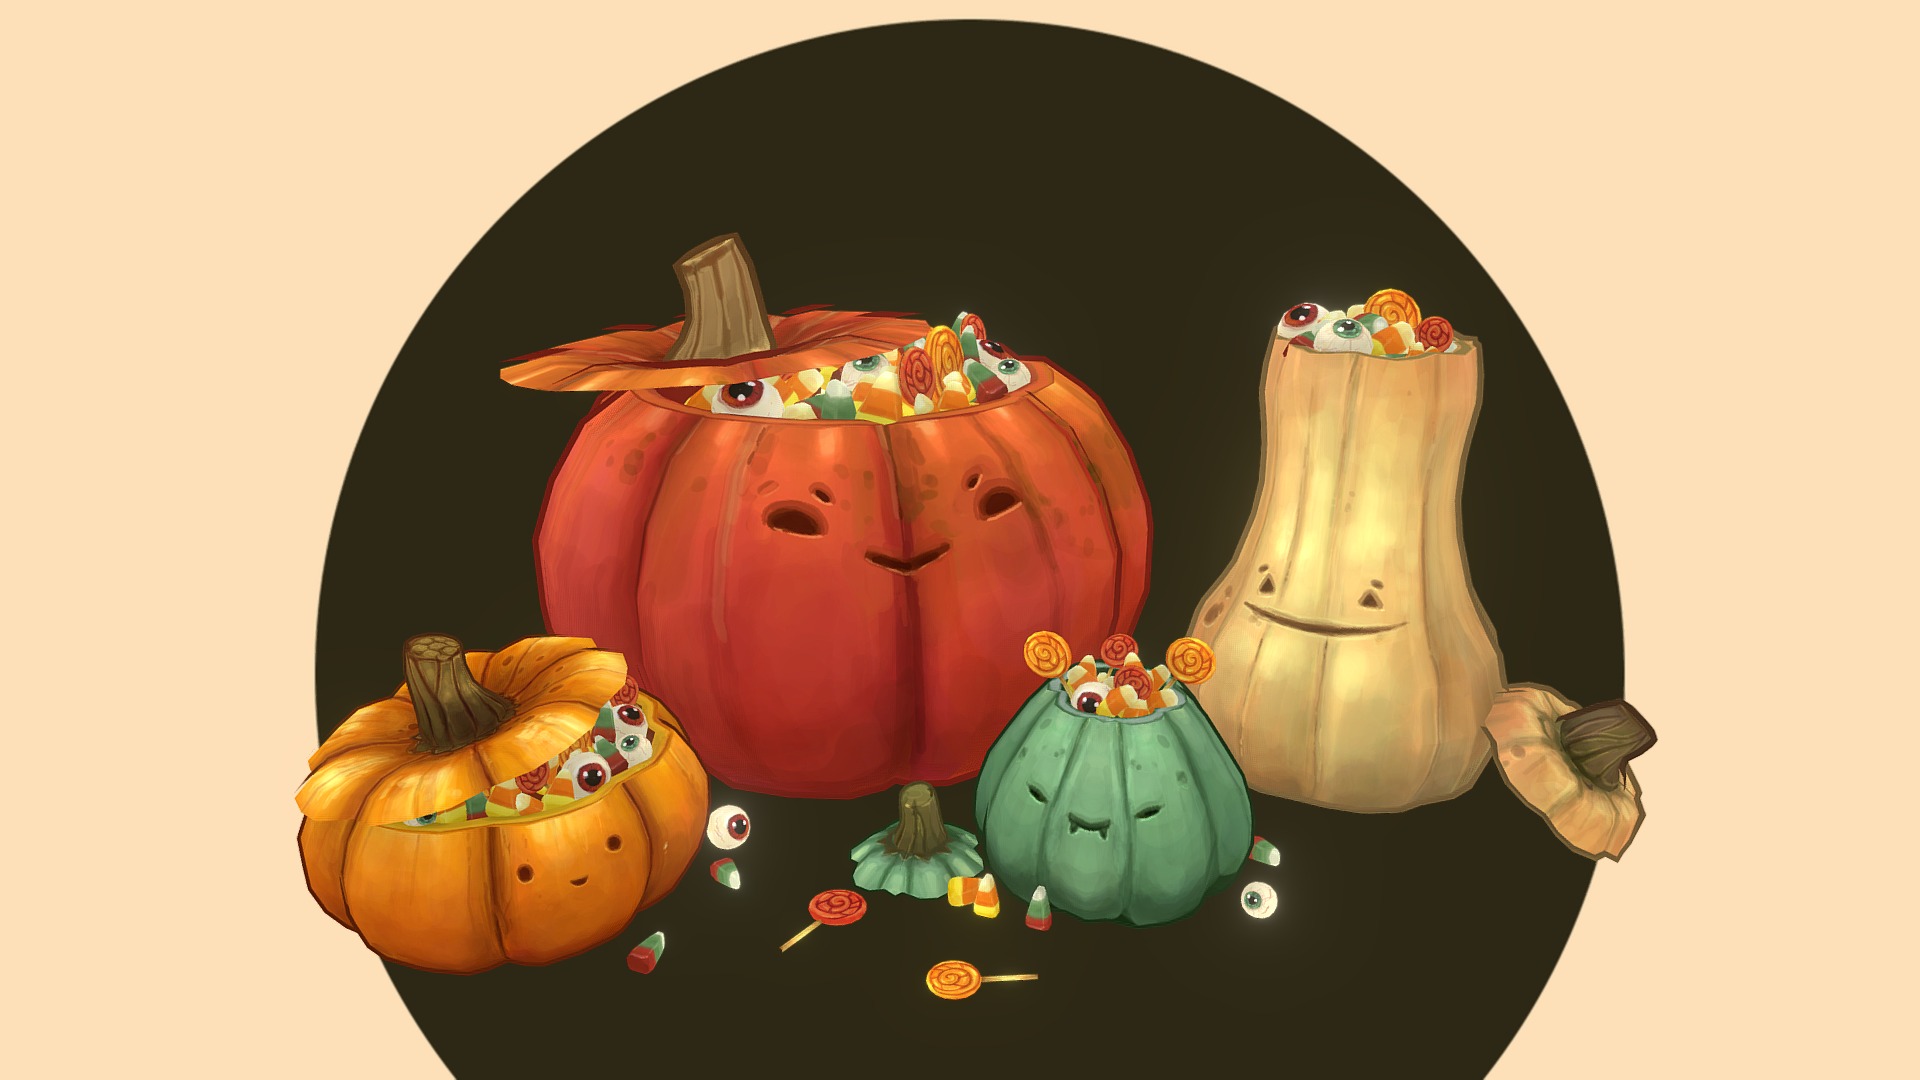 I initially made these Pumpkins for the 1st of October, which was a bit ahead of time for Halloween. Finally managed to add some sweets to these pumpkins, so they can spread some spooky joy!

All handpainted inside Blender 3d model